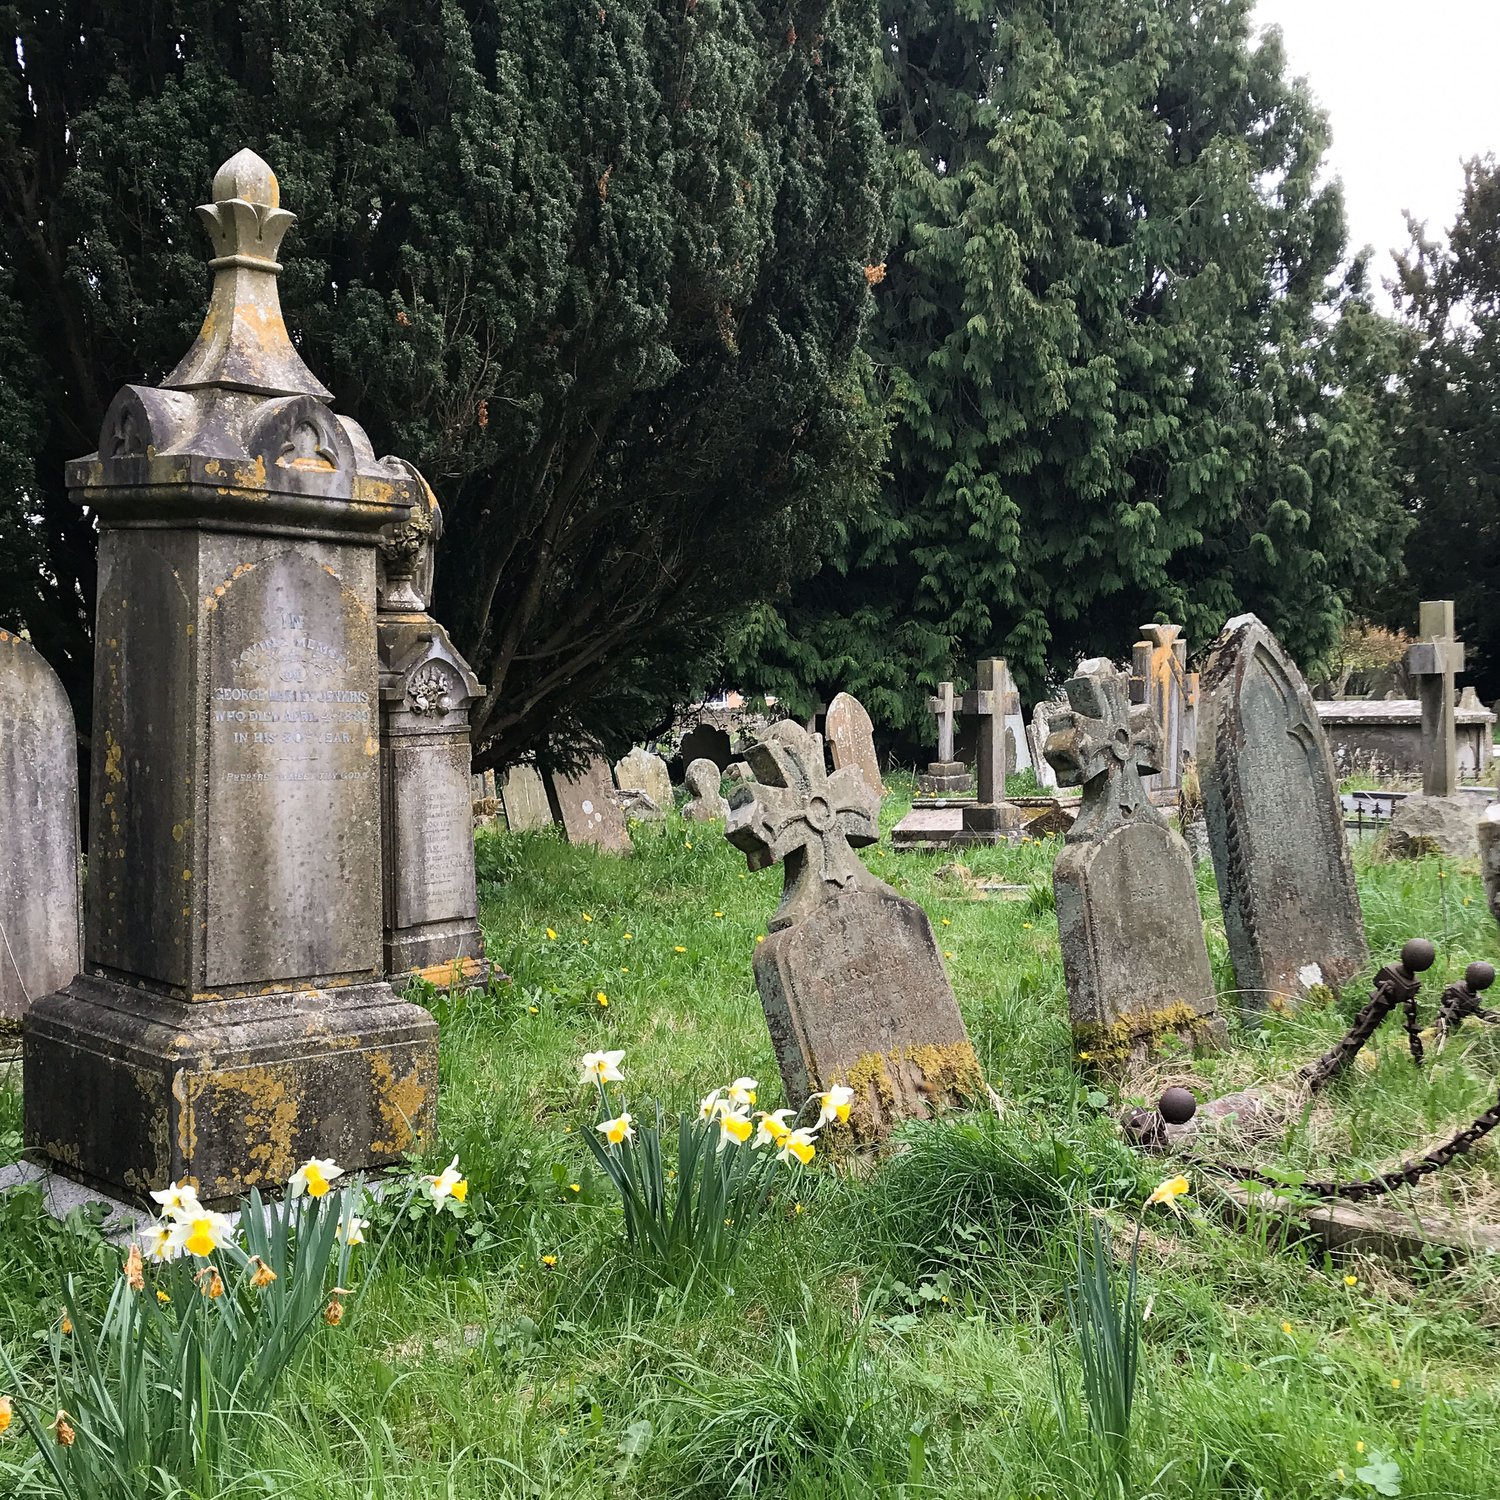 Nature Tripping Episode 17 - A Shropshire Graveyard